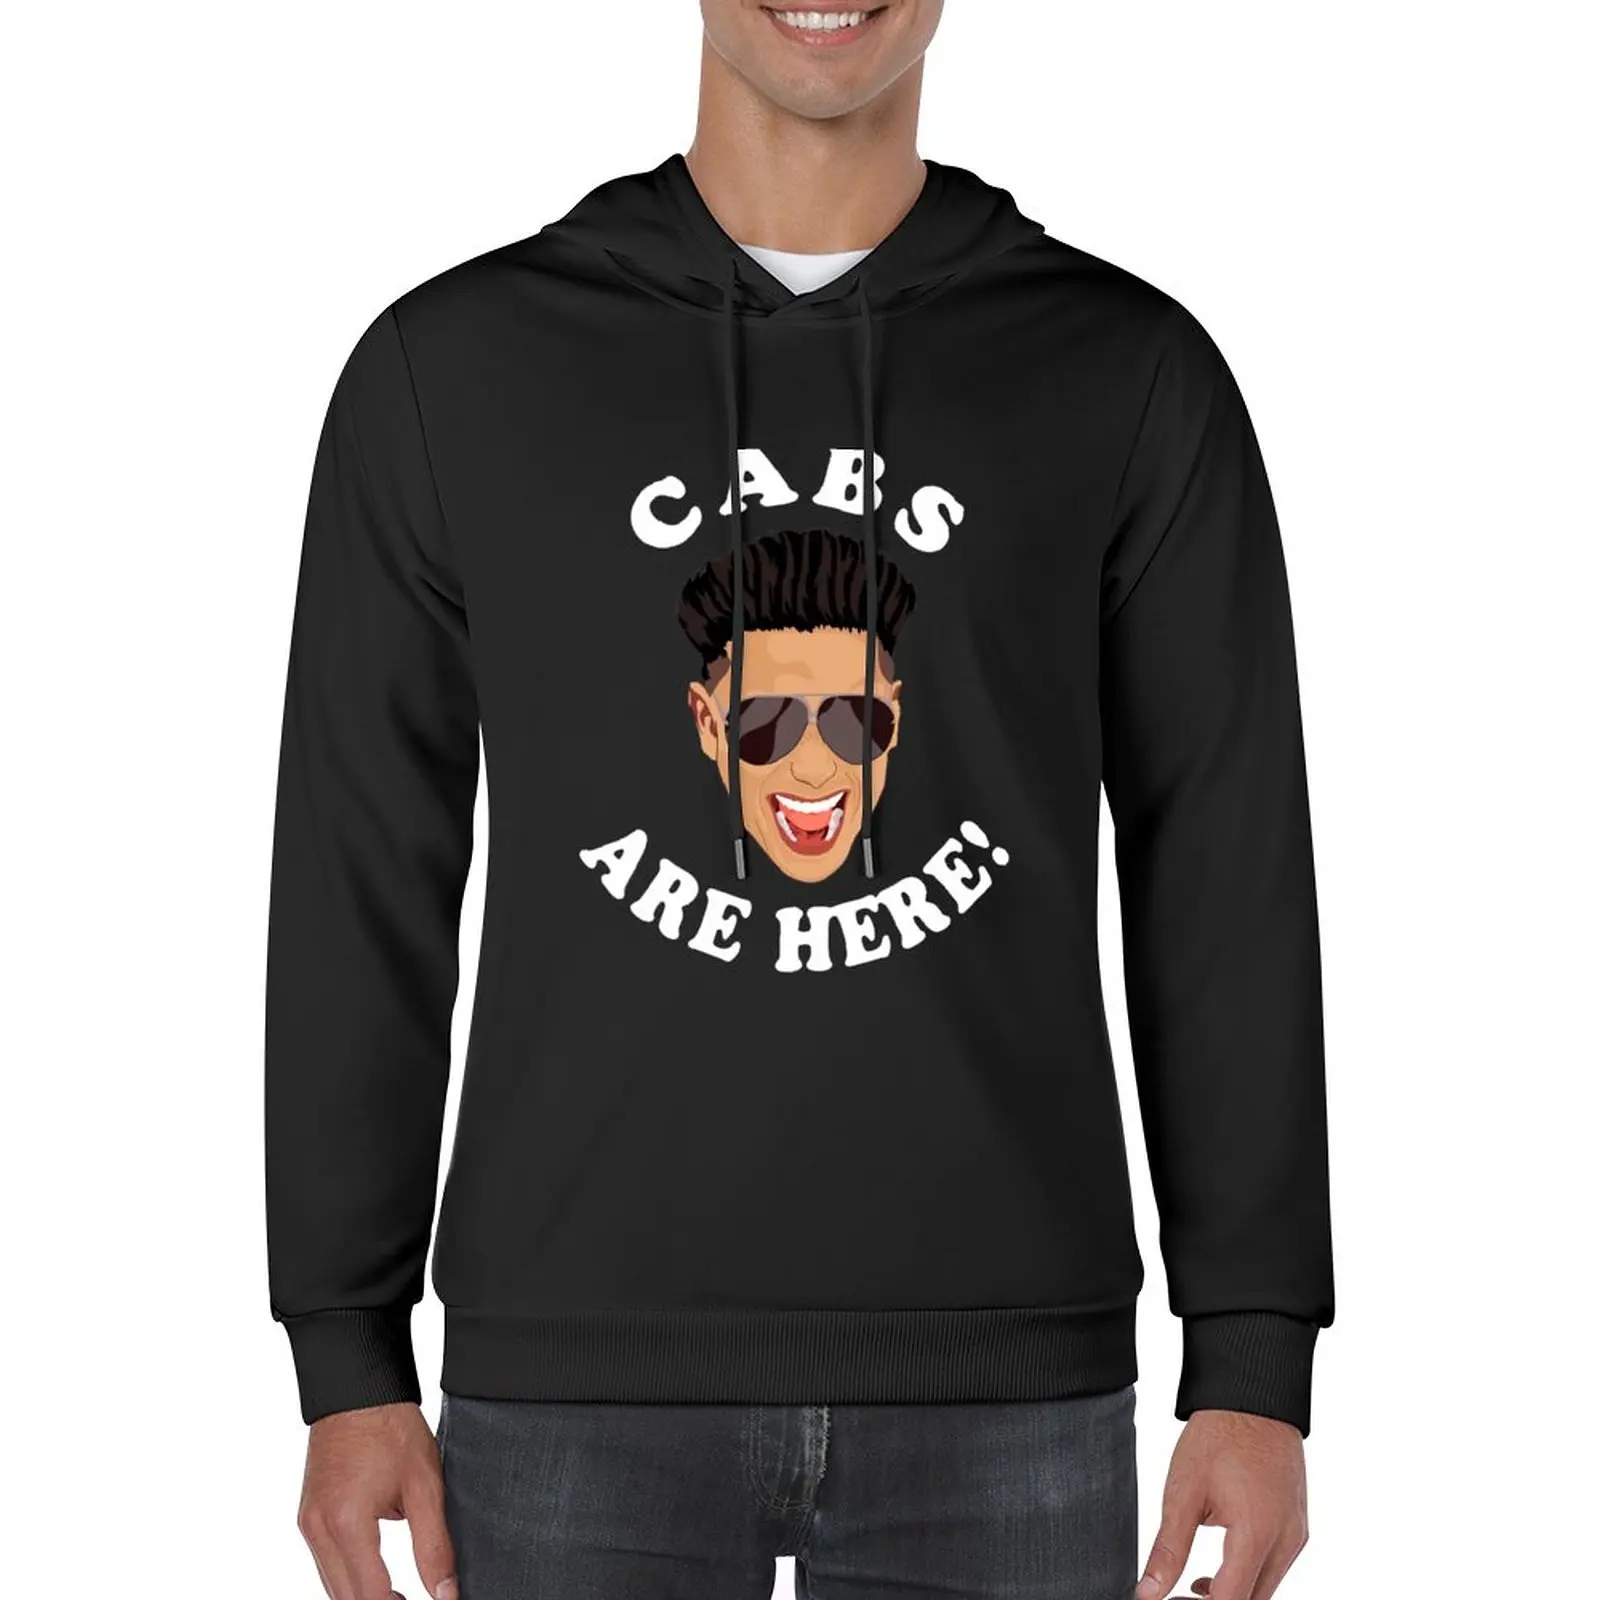 

New Dj Pauly d cabs are here T-Shirts Gift For Fans, For Men and Women Pullover Hoodie autumn graphic t shirts men hoodie men